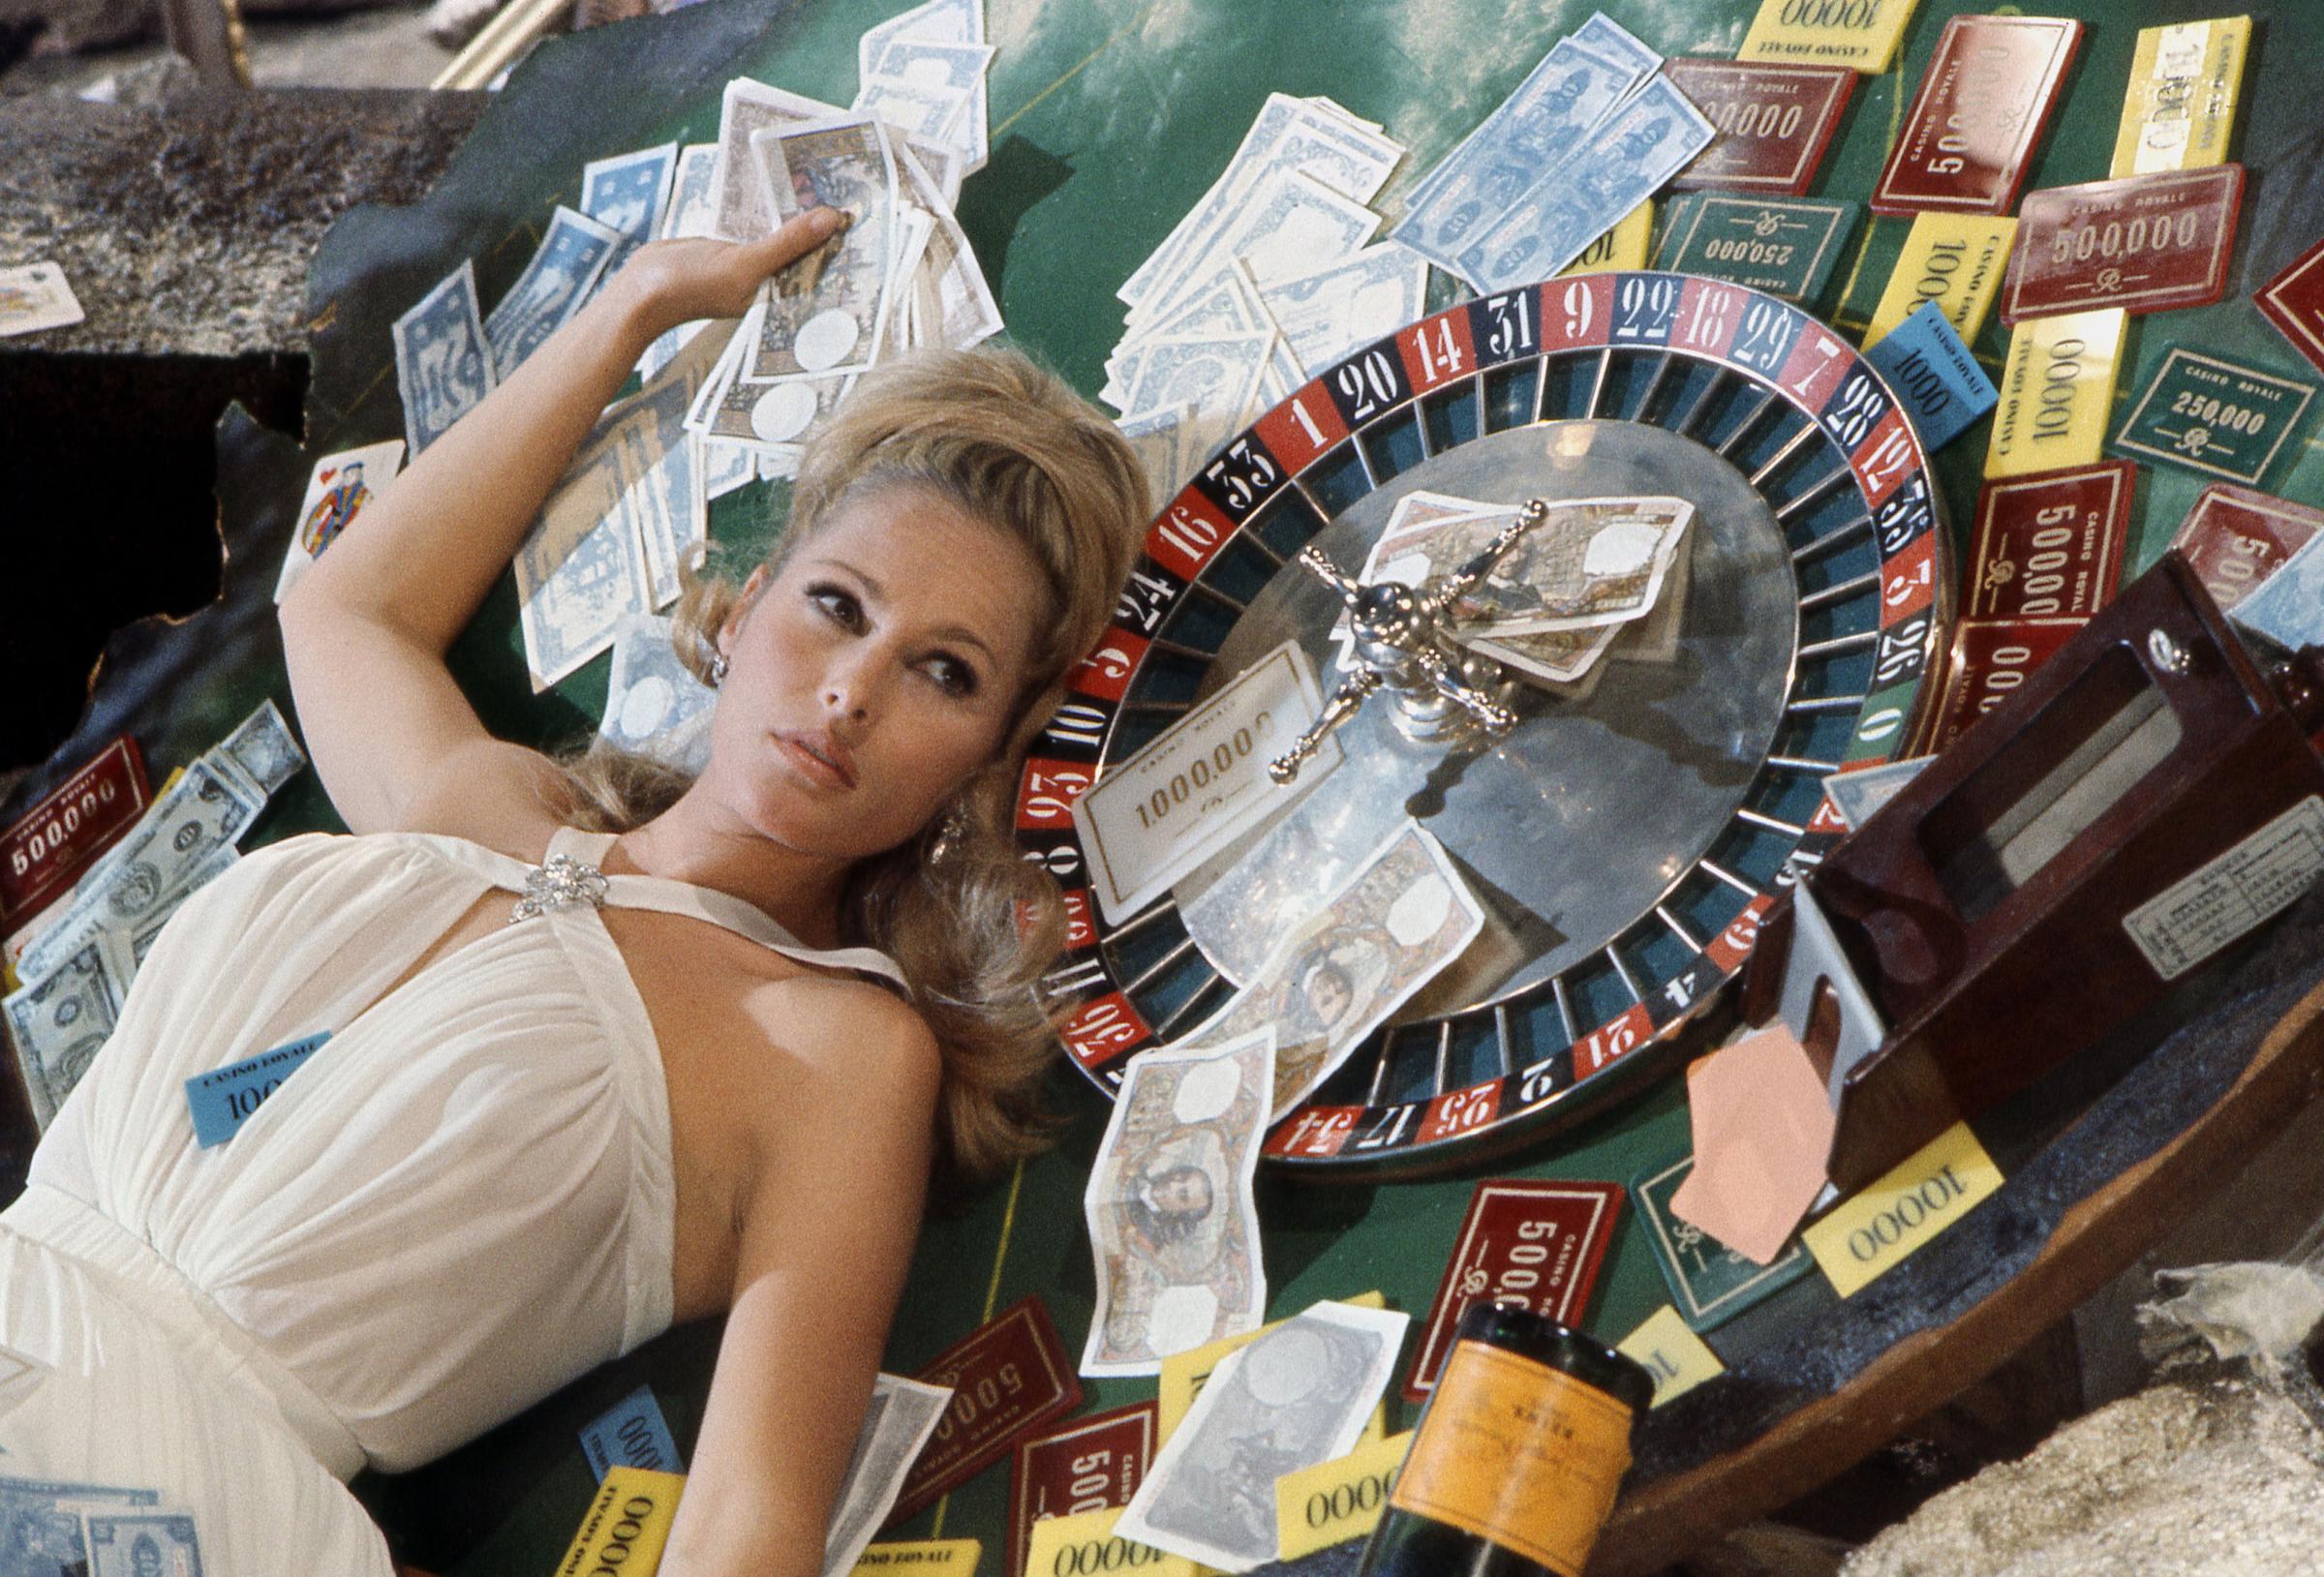 Ursula Andress on the set of "Casino Royale" in 1967. | Source: Getty Images